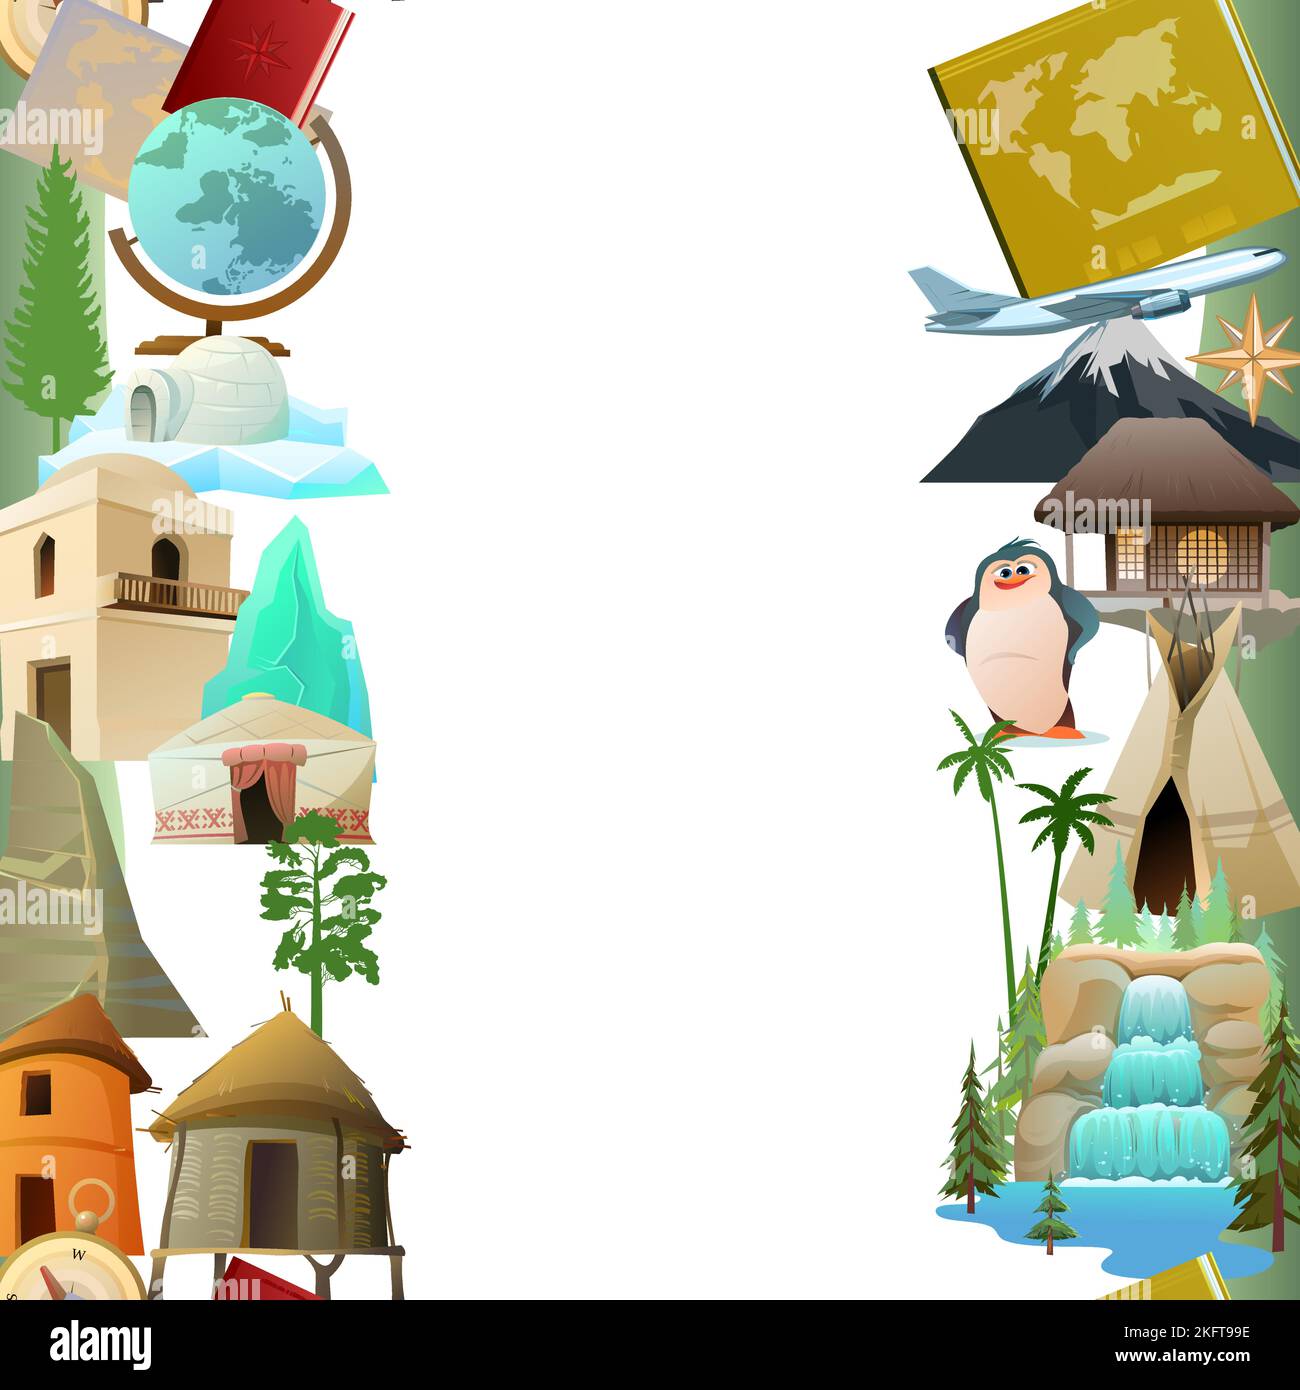 World geography seamless vertical frame. Cartoon style. Travel items and plants trees of climatic zones. Dwellings of different peoples of countries. Stock Vector